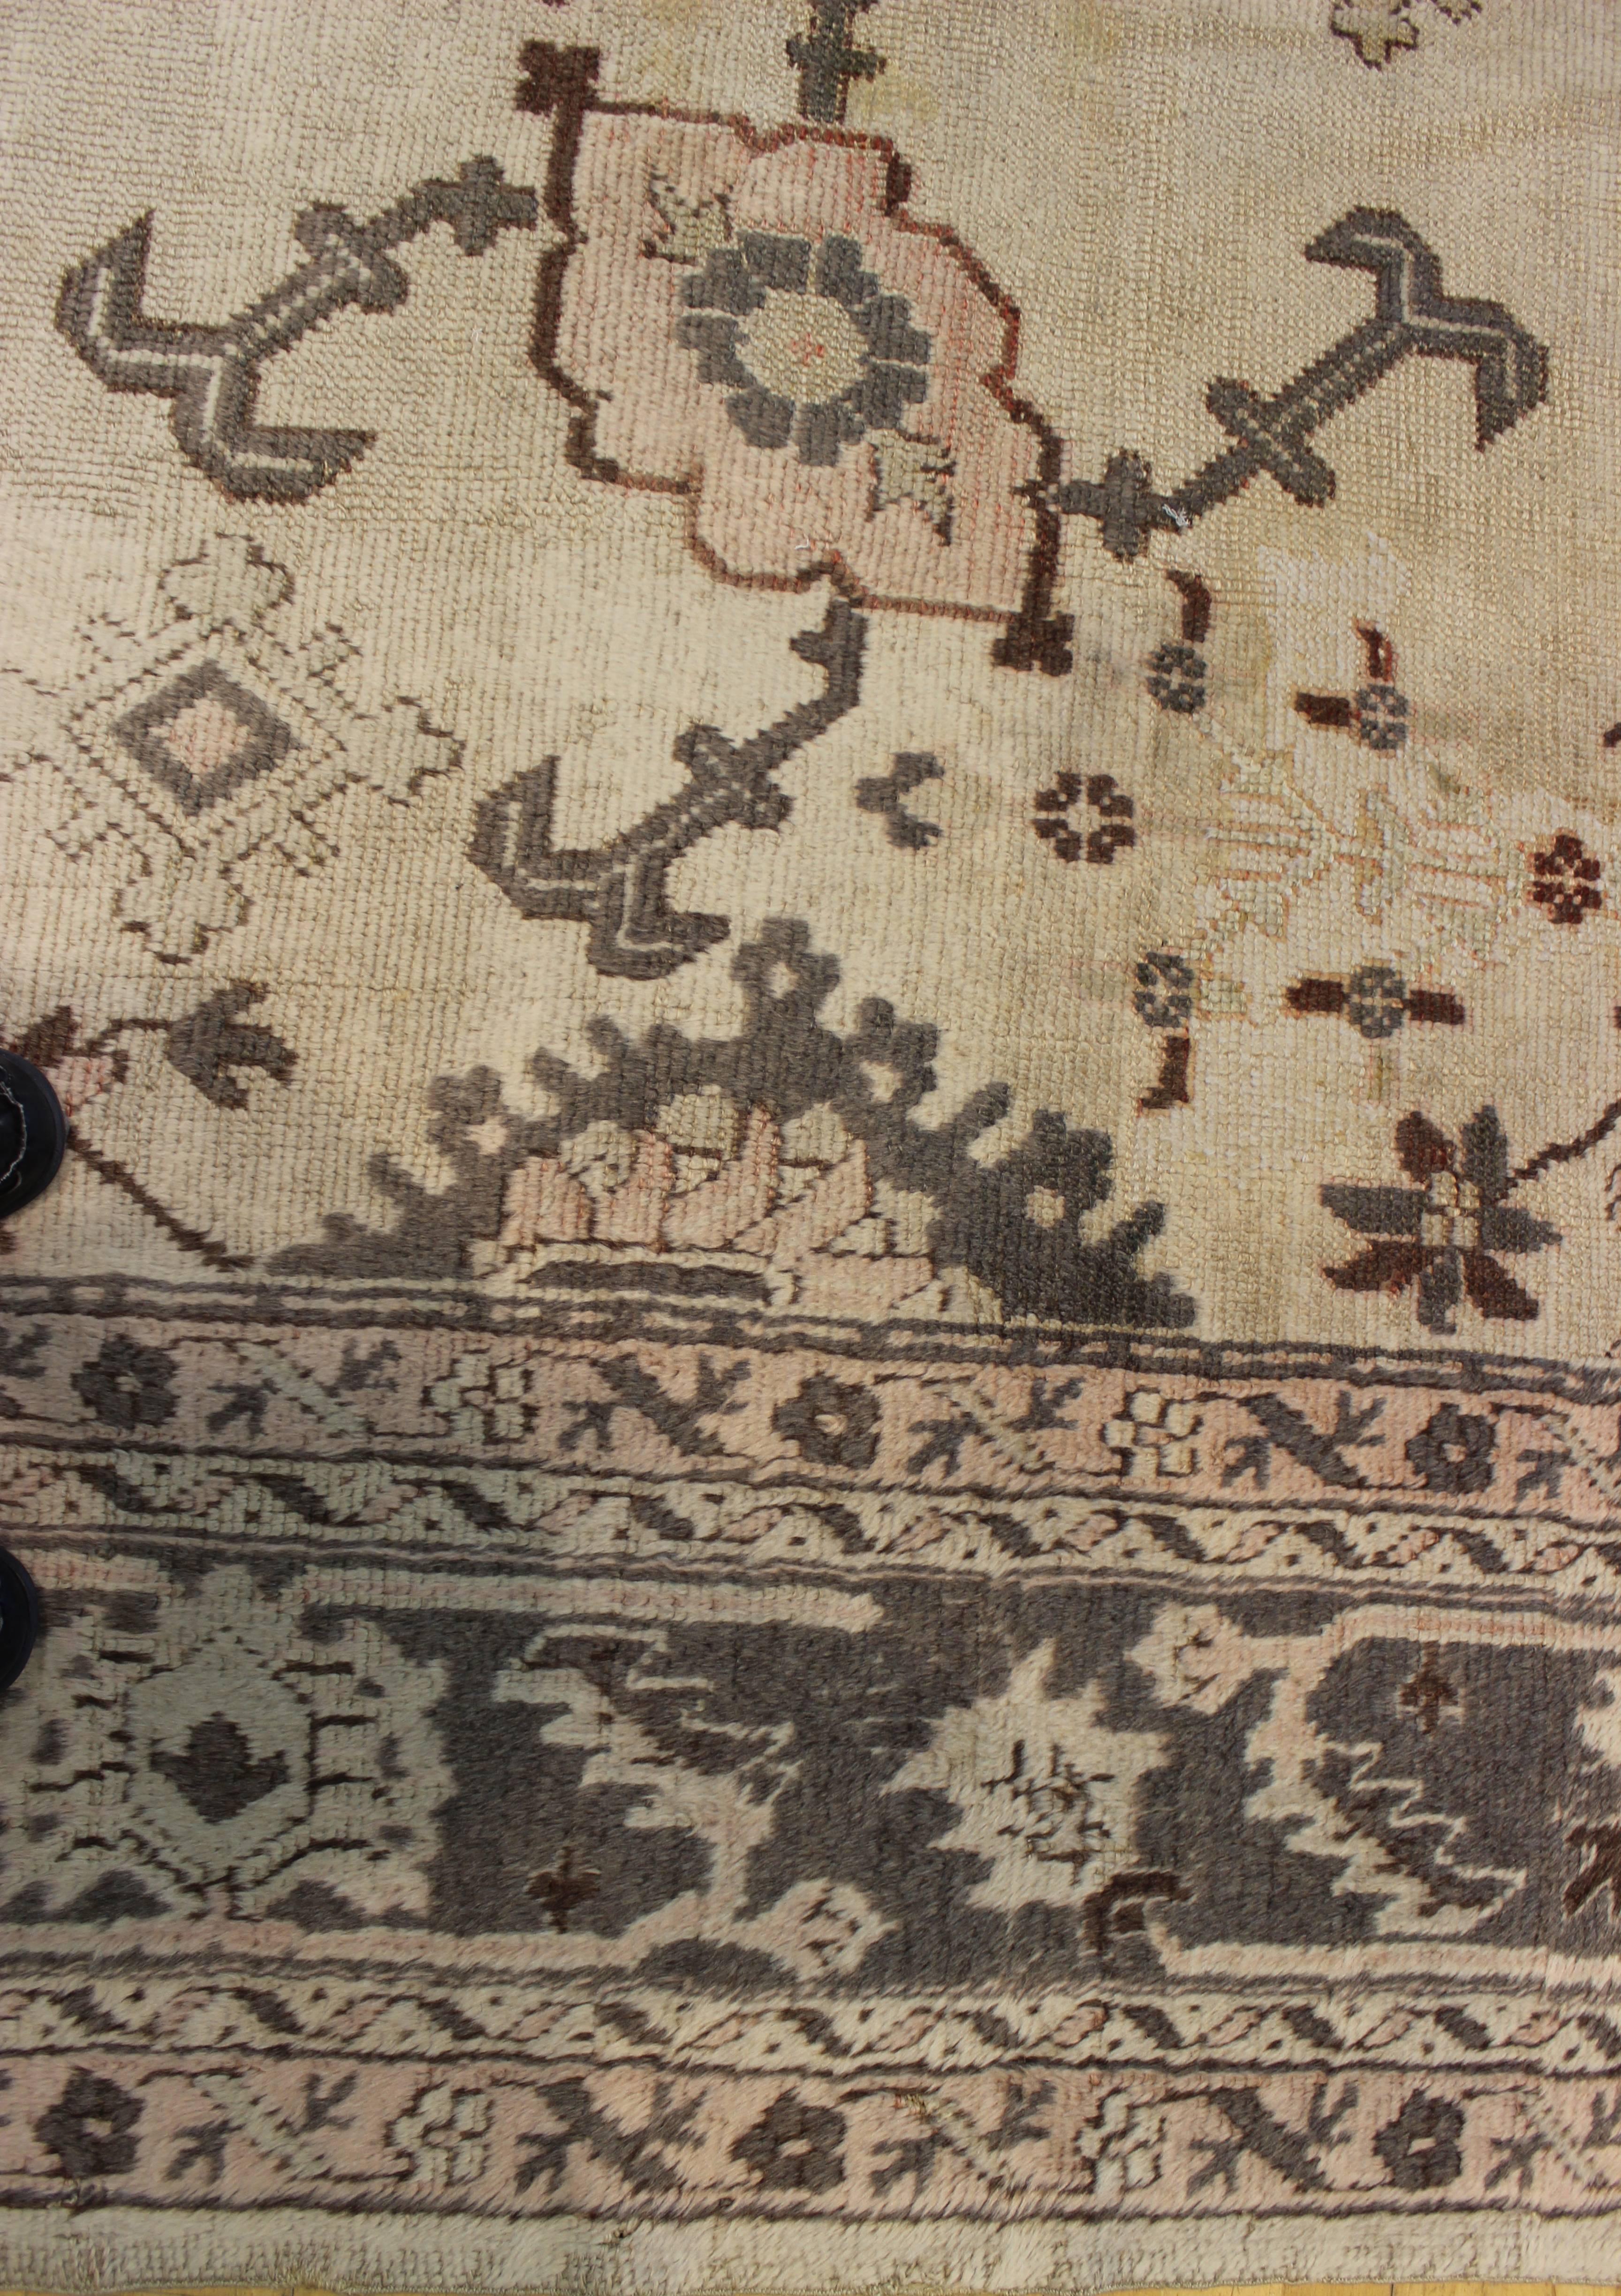 Harshang pattern Oushak carpet, circa 1910. This rug was previously antique washed, giving it a more subtle coloration.